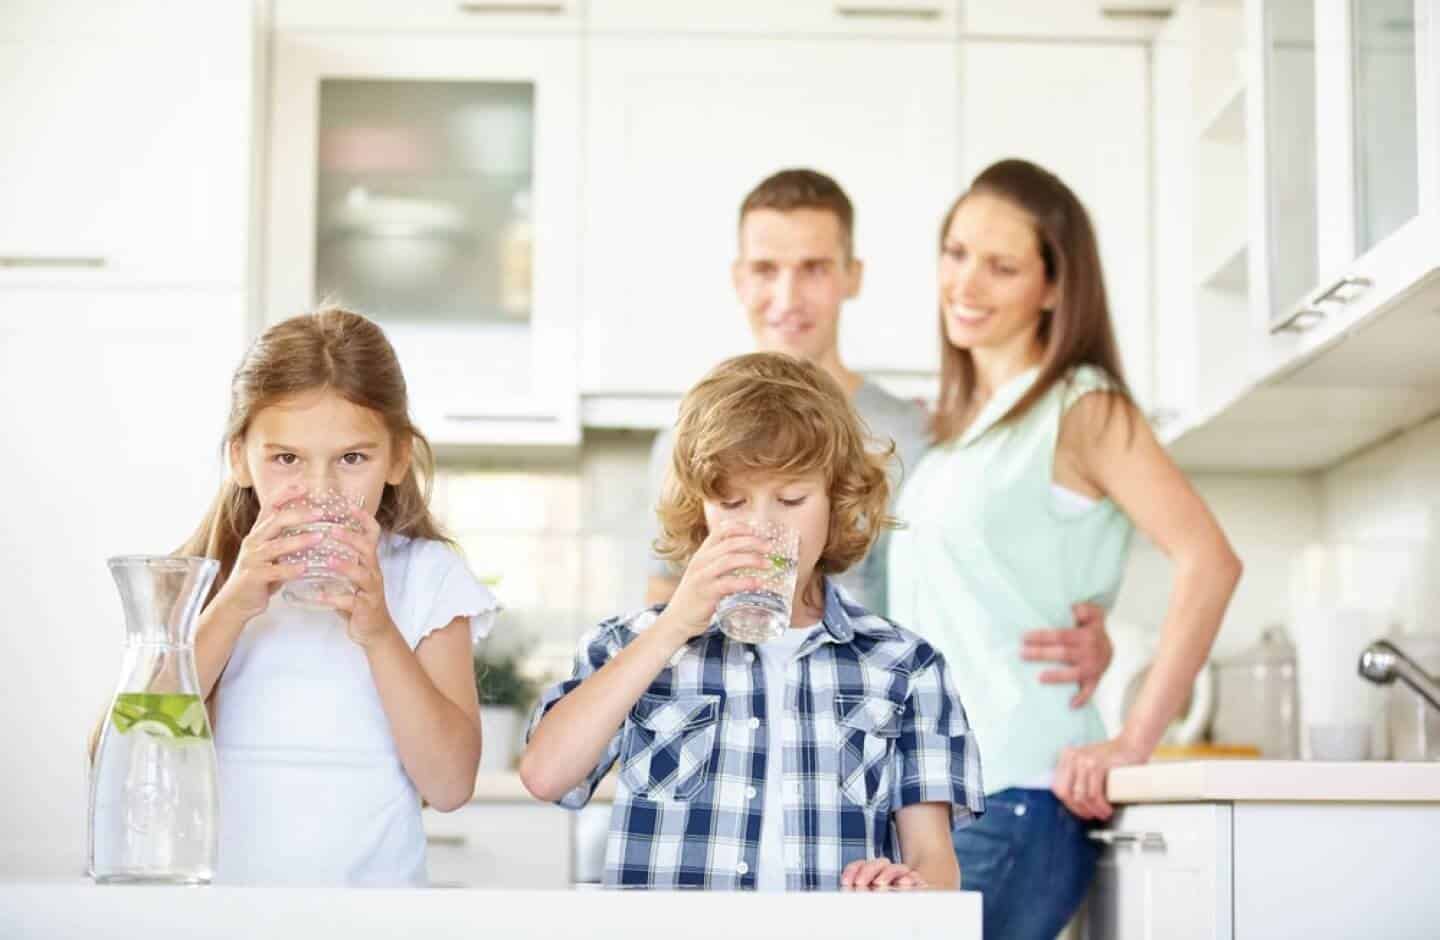 Children enjoy clean, better-tasting water from whole house water filtration system